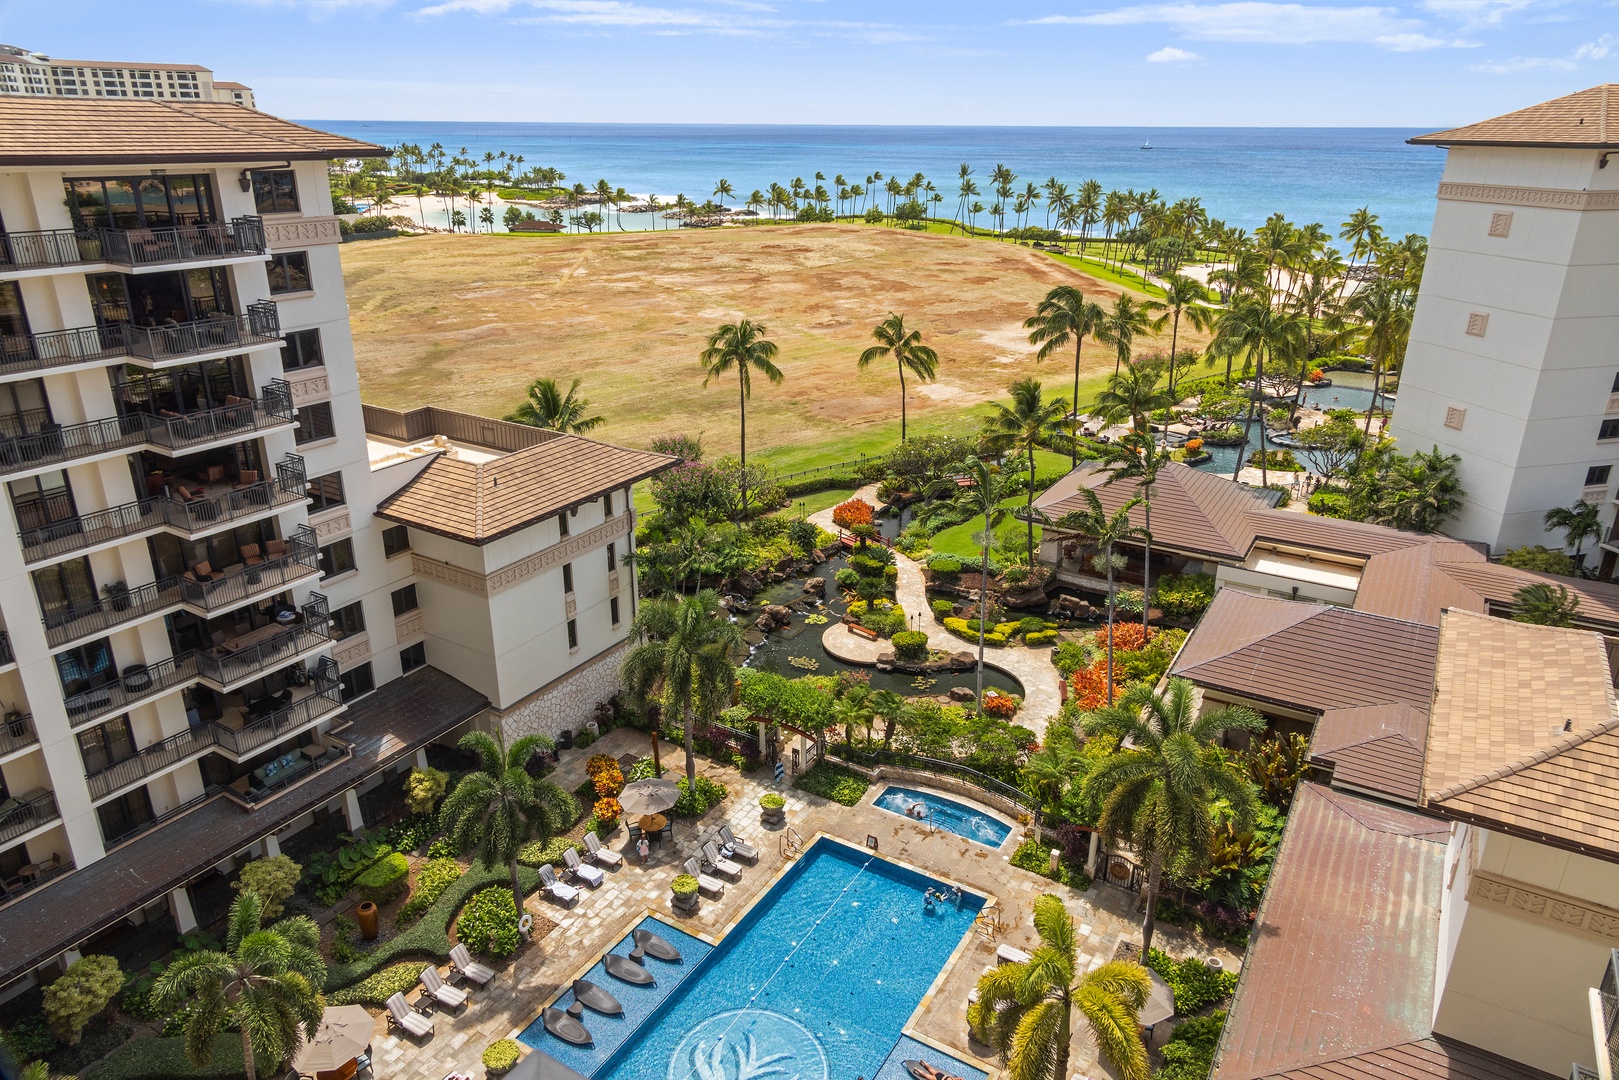 Kapolei Vacation Rentals, Ko Olina Beach Villas O1001 - Resort pool view from the lanai with a glimpse of the ocean